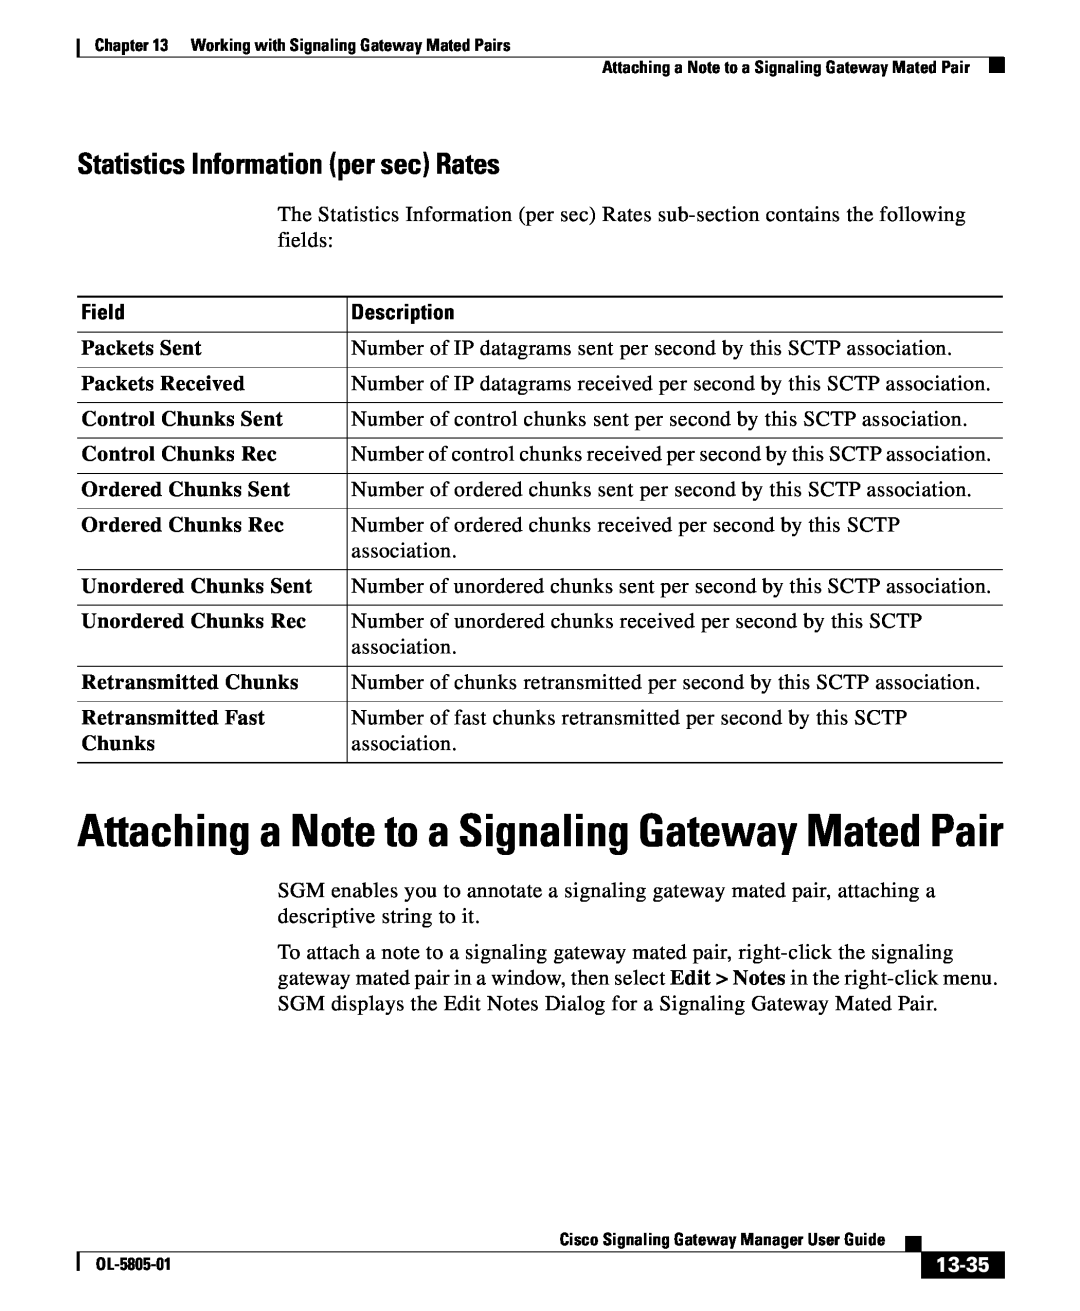 Cisco Systems OL-5805-01 Statistics Information per sec Rates, 13-35, Attaching a Note to a Signaling Gateway Mated Pair 